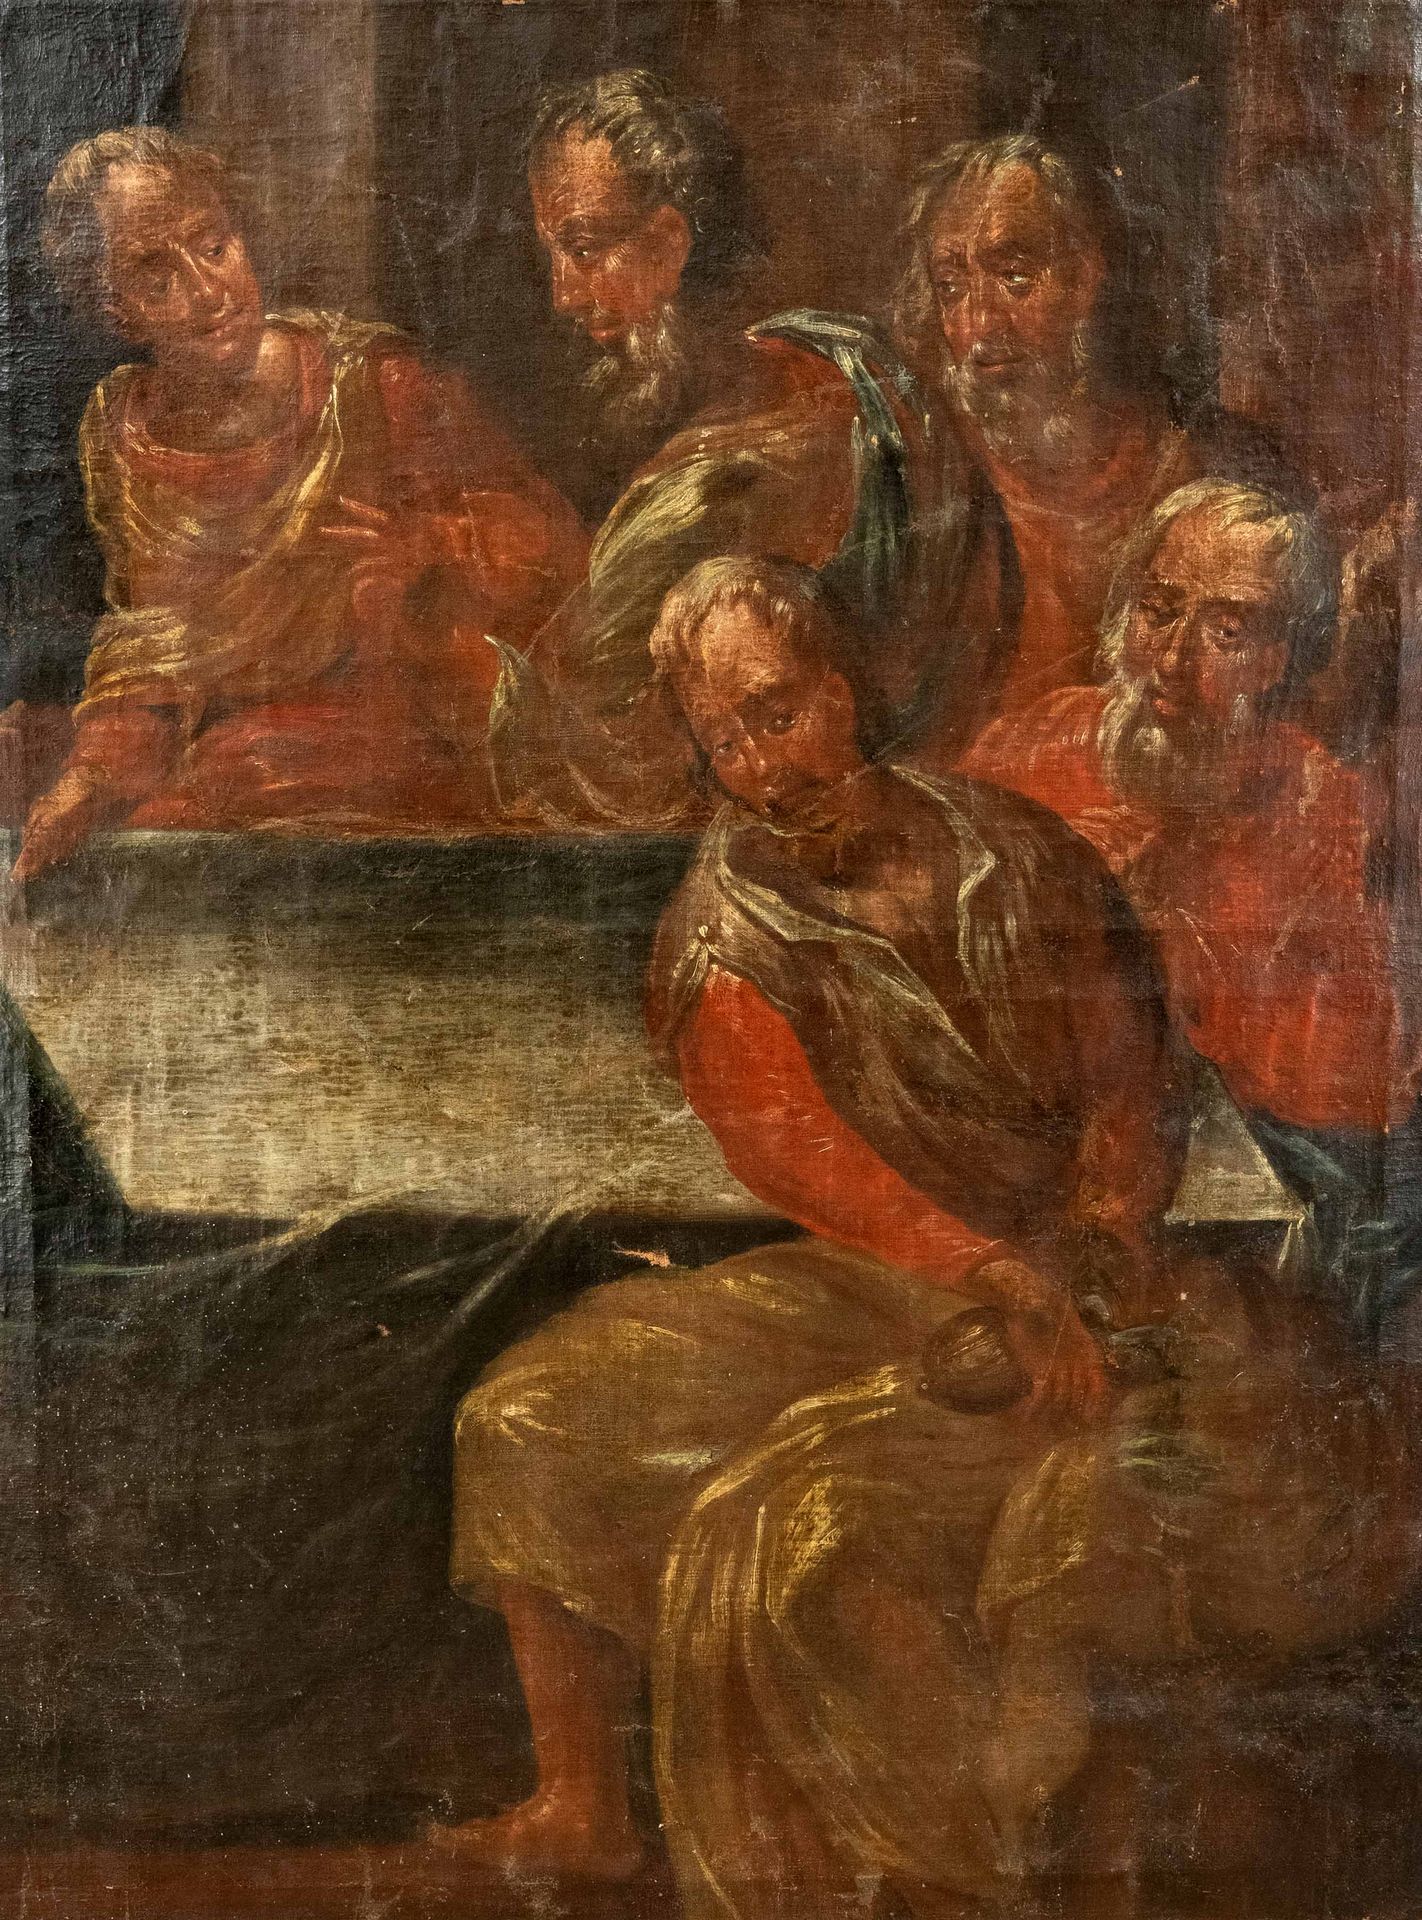 Null Italian painter around 1700, the Last Supper, fragment of the right quarter&hellip;